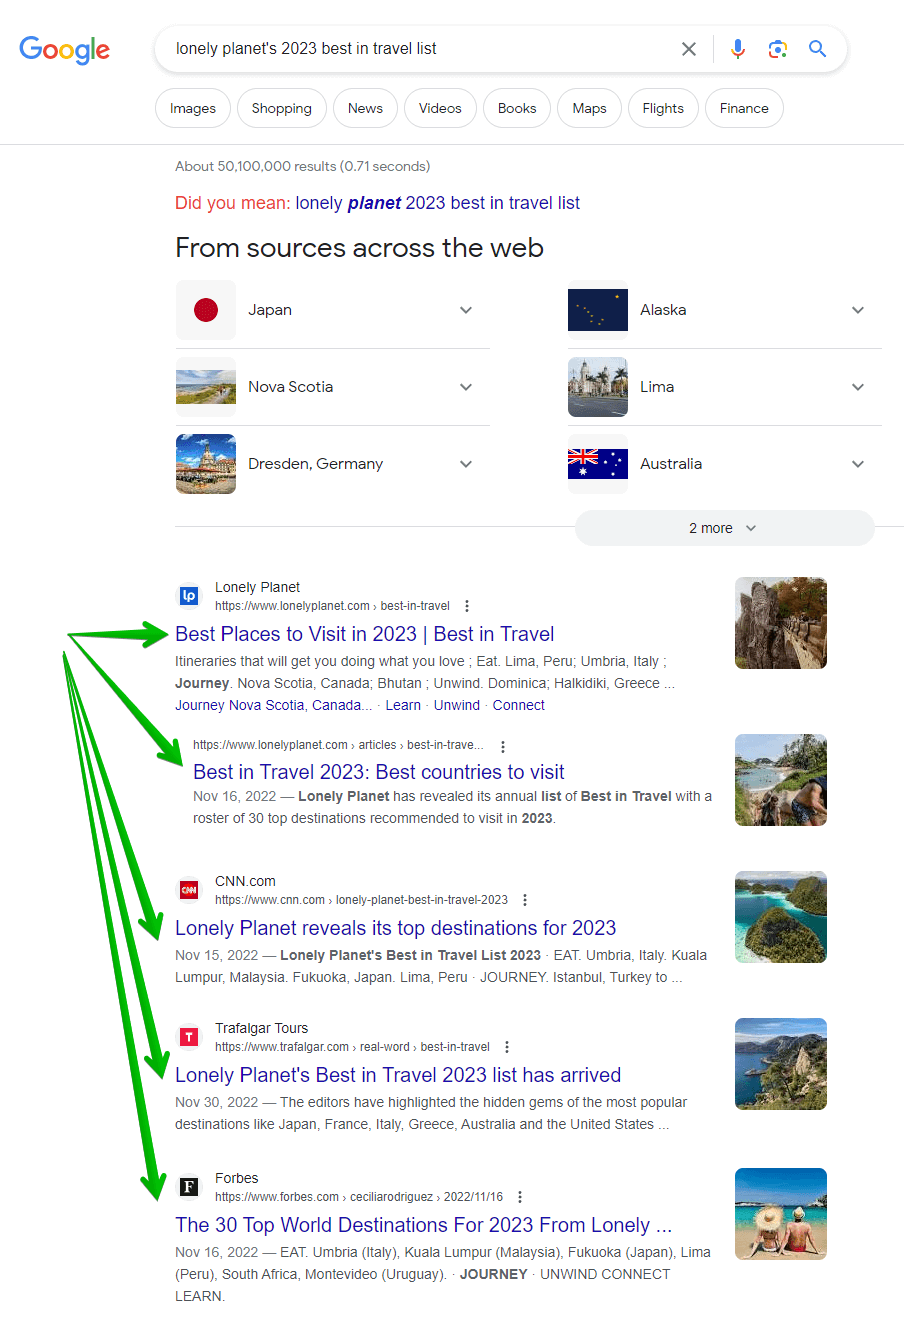 Search results for 'Lonely Planet's 2023 Best in Travel List' on Google show four sources referencing the guide, including Lonely Planet's official website and mentions in media